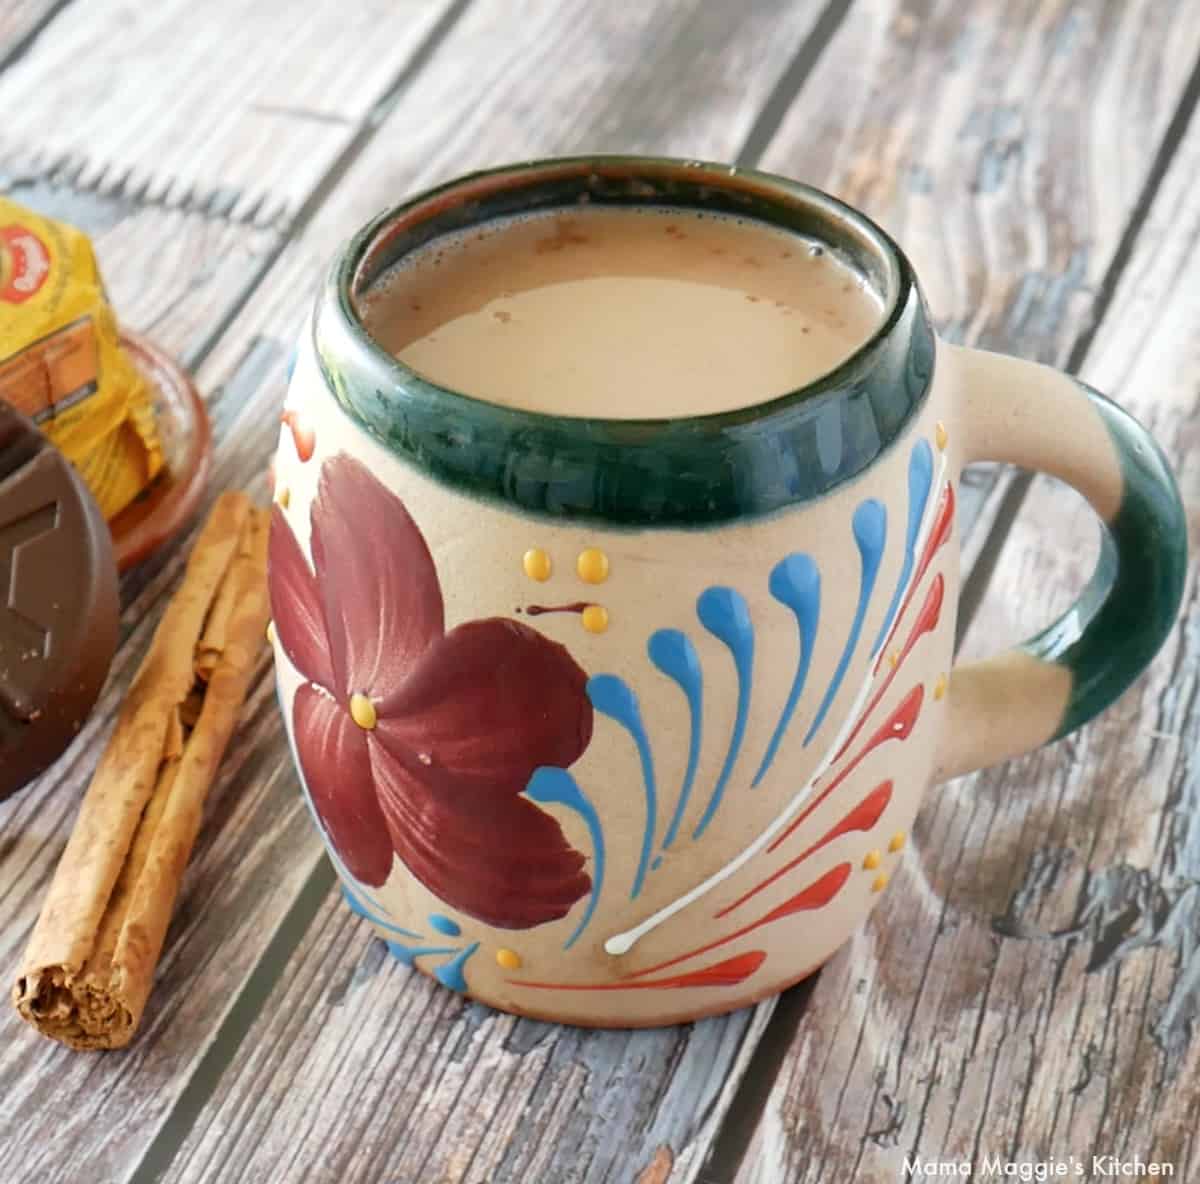 Atole de Chocolate served in a decorative Mexican cup next to a cinnamon stick.